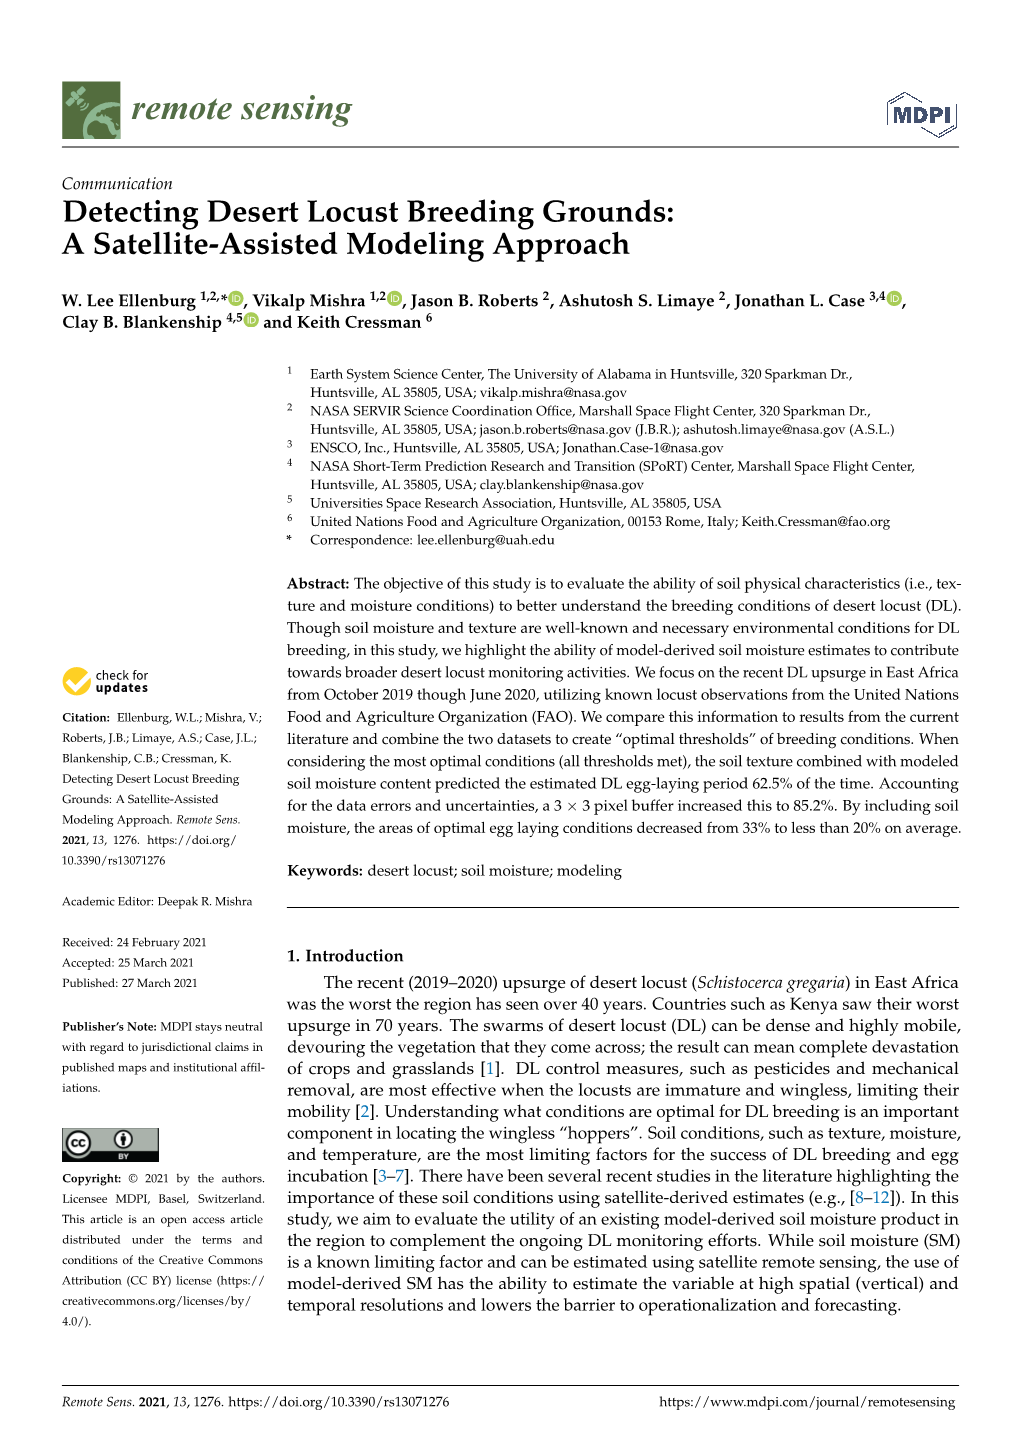 Detecting Desert Locust Breeding Grounds: a Satellite-Assisted Modeling Approach